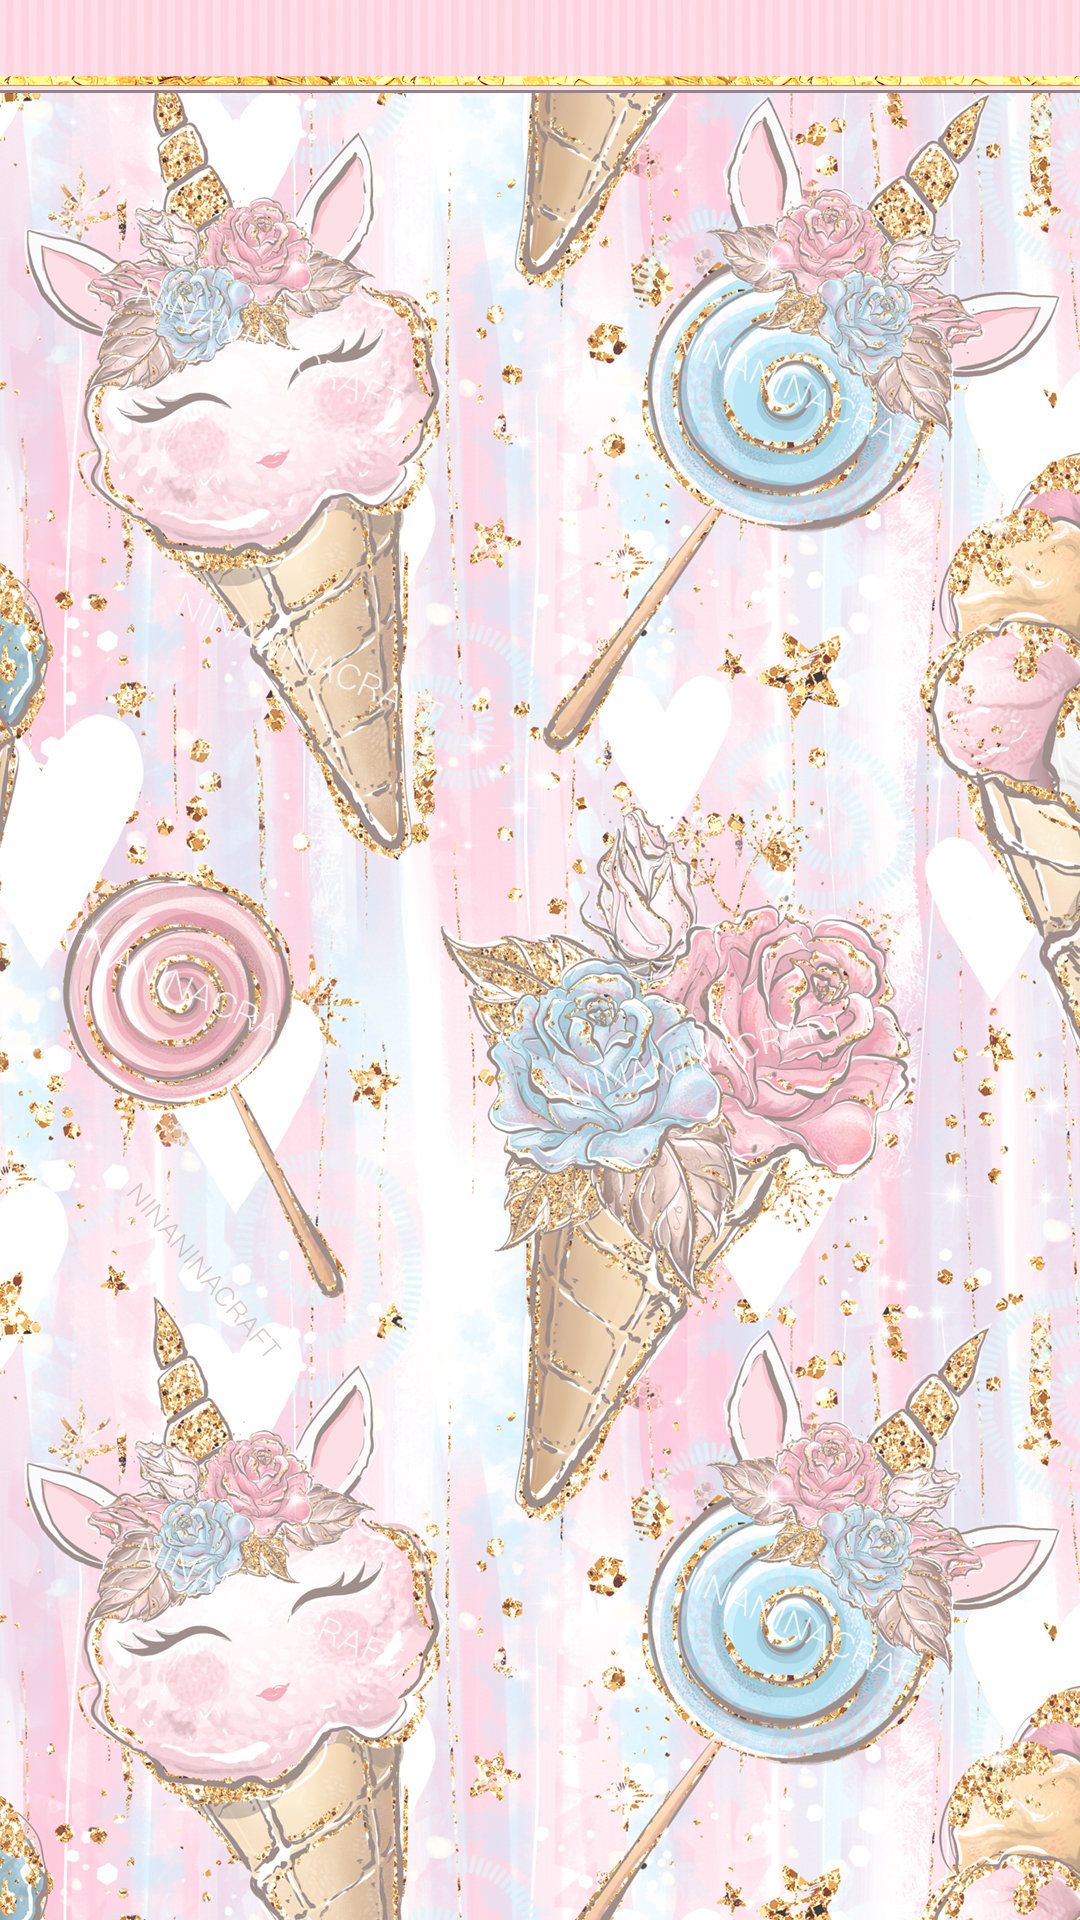 Land of Candy Digital Papers, Cute Candy Seamless Patterns, Pastel Rainbow Unicorn, Roses, Glitter Girl, Cotton Candy, Sweets, Custom Fabric